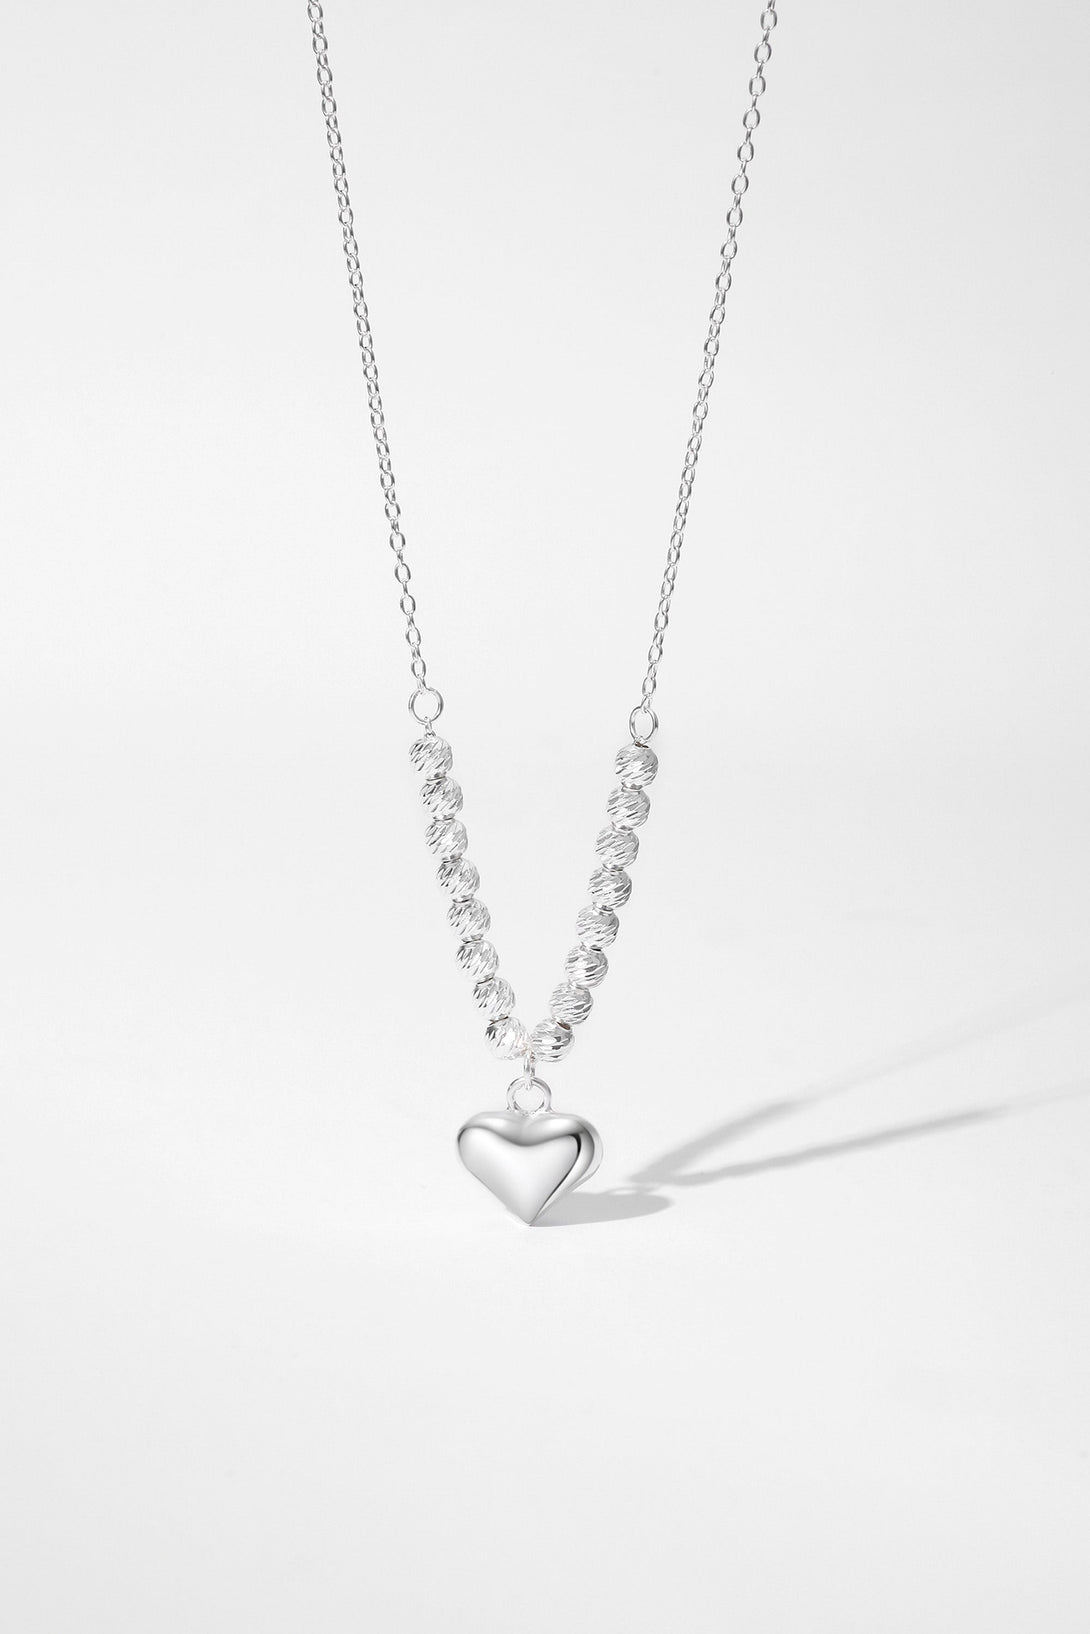 Sterling Silver Diamond-Cut Ball Bead Chain and Heart Pendant Necklace - Classicharms